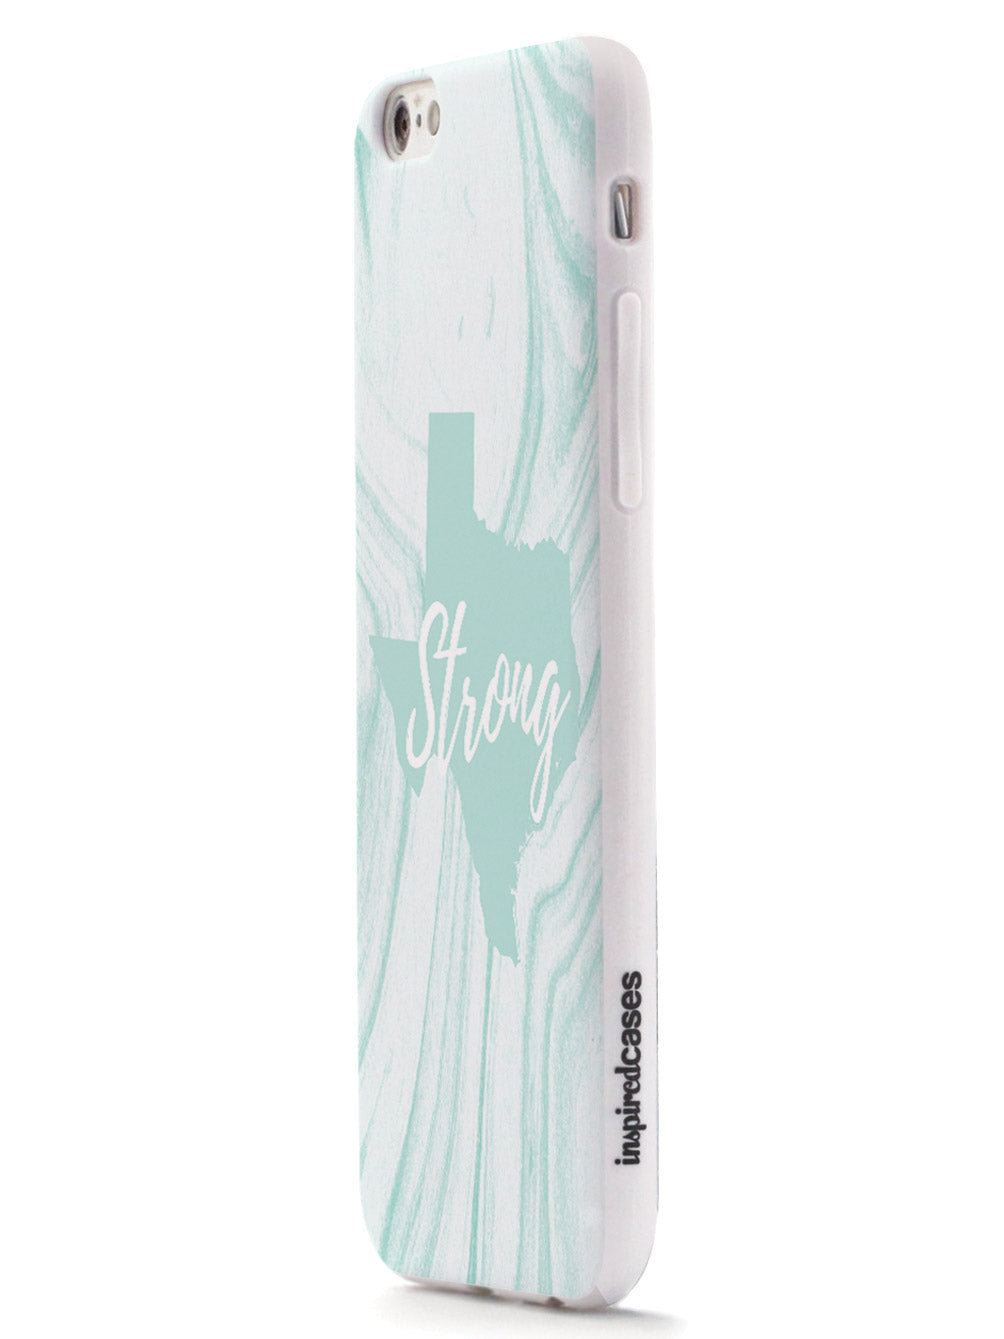 Texas Strong Teal Marble Pattern Support Phone Case